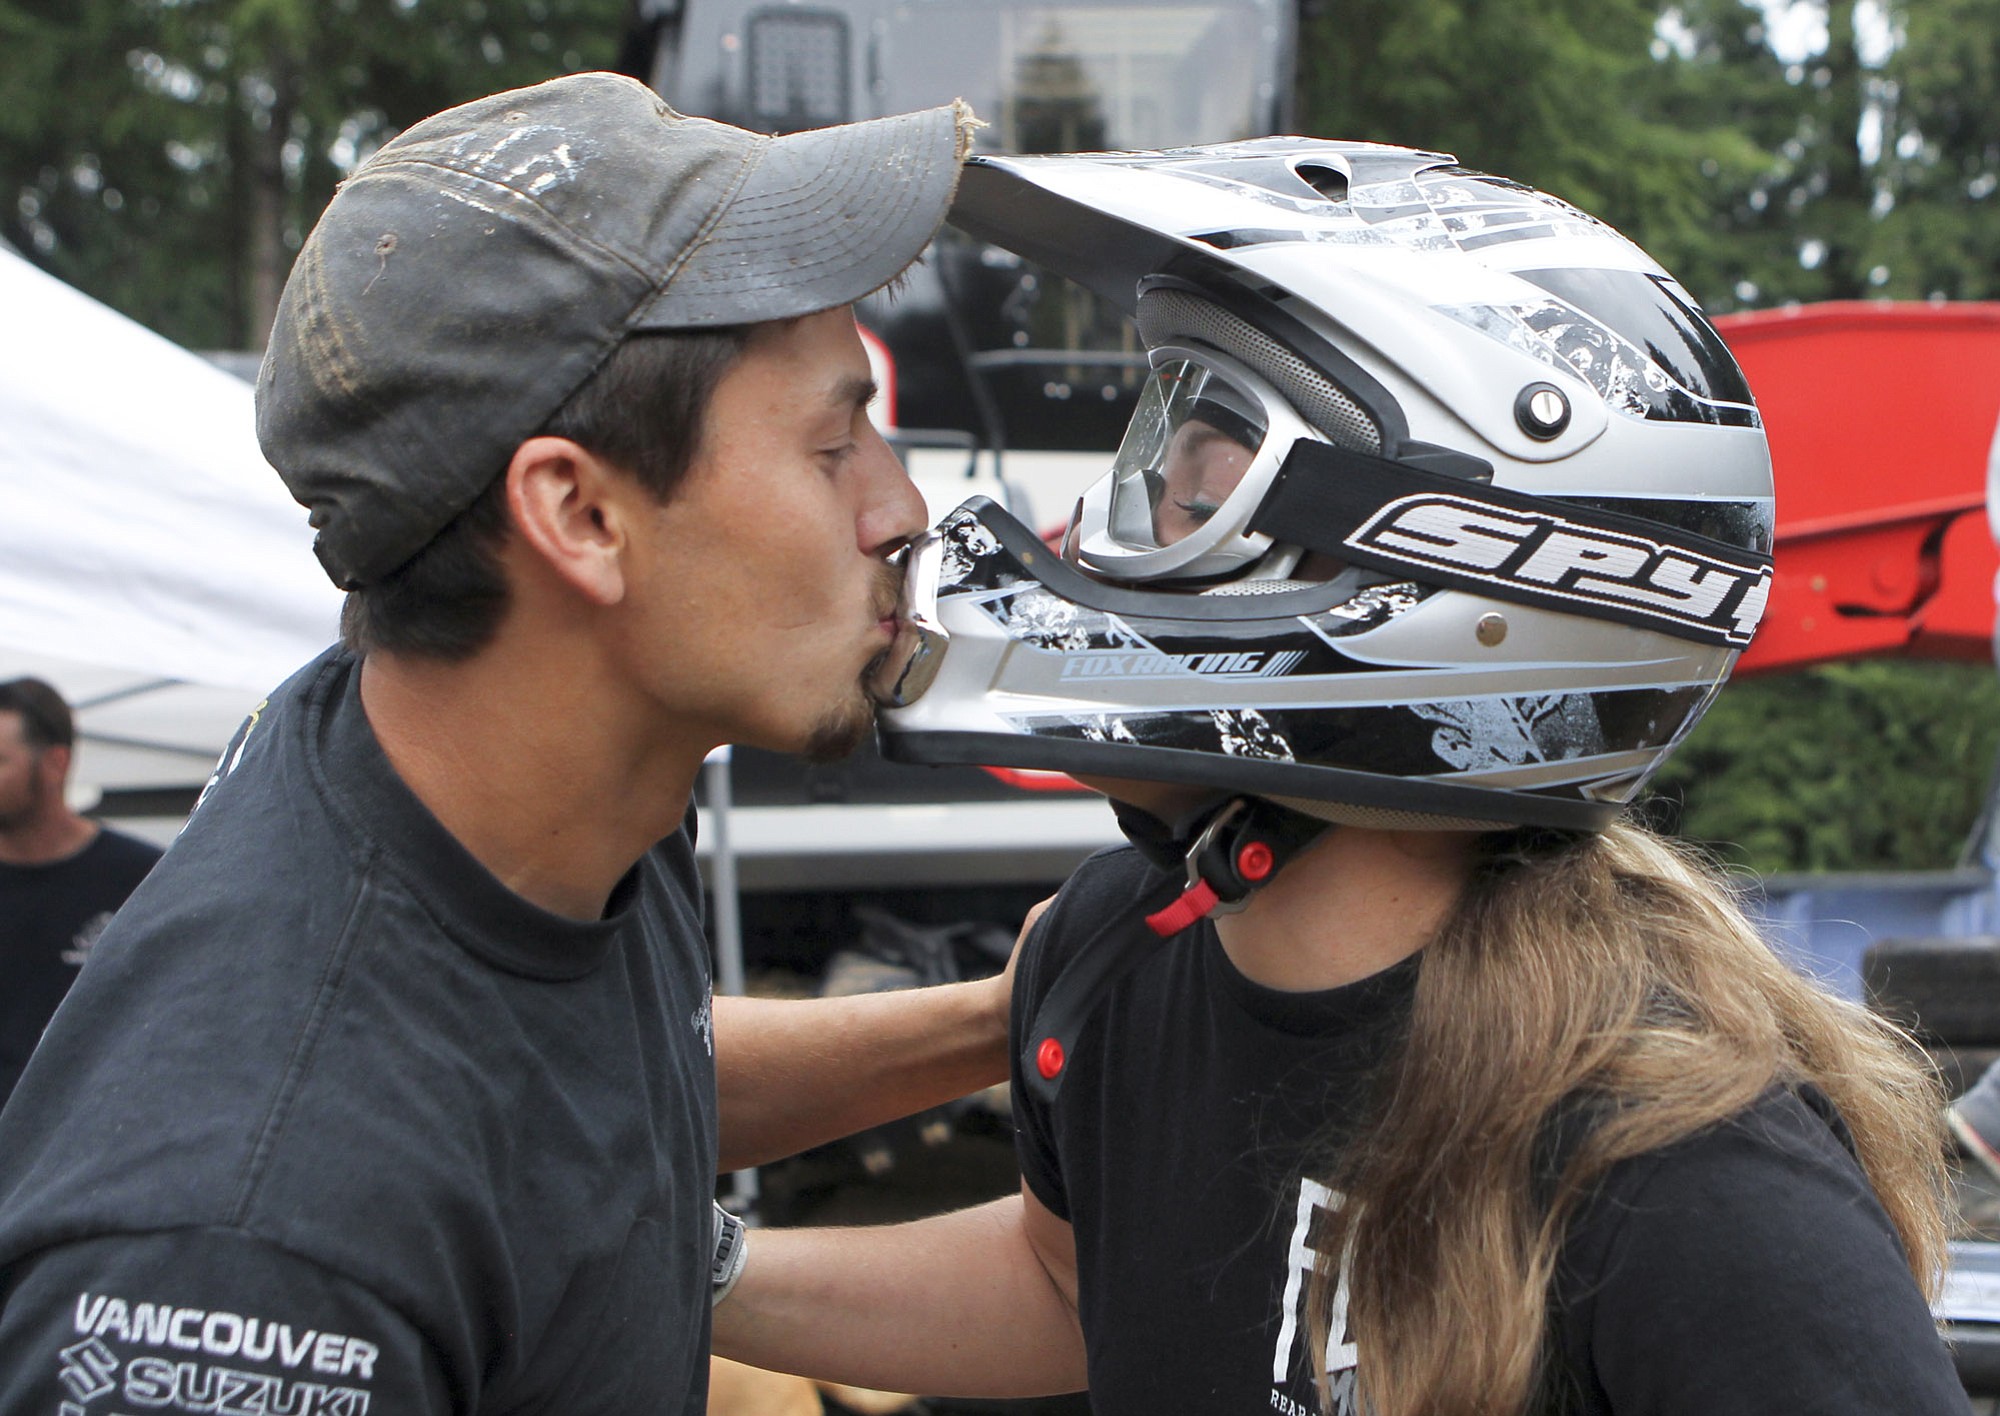 Sarah Kortekaas gets a good-luck kiss from her boyfriend before going for glory during the annual Amboy Territorial Days lawnmower races in 2014.